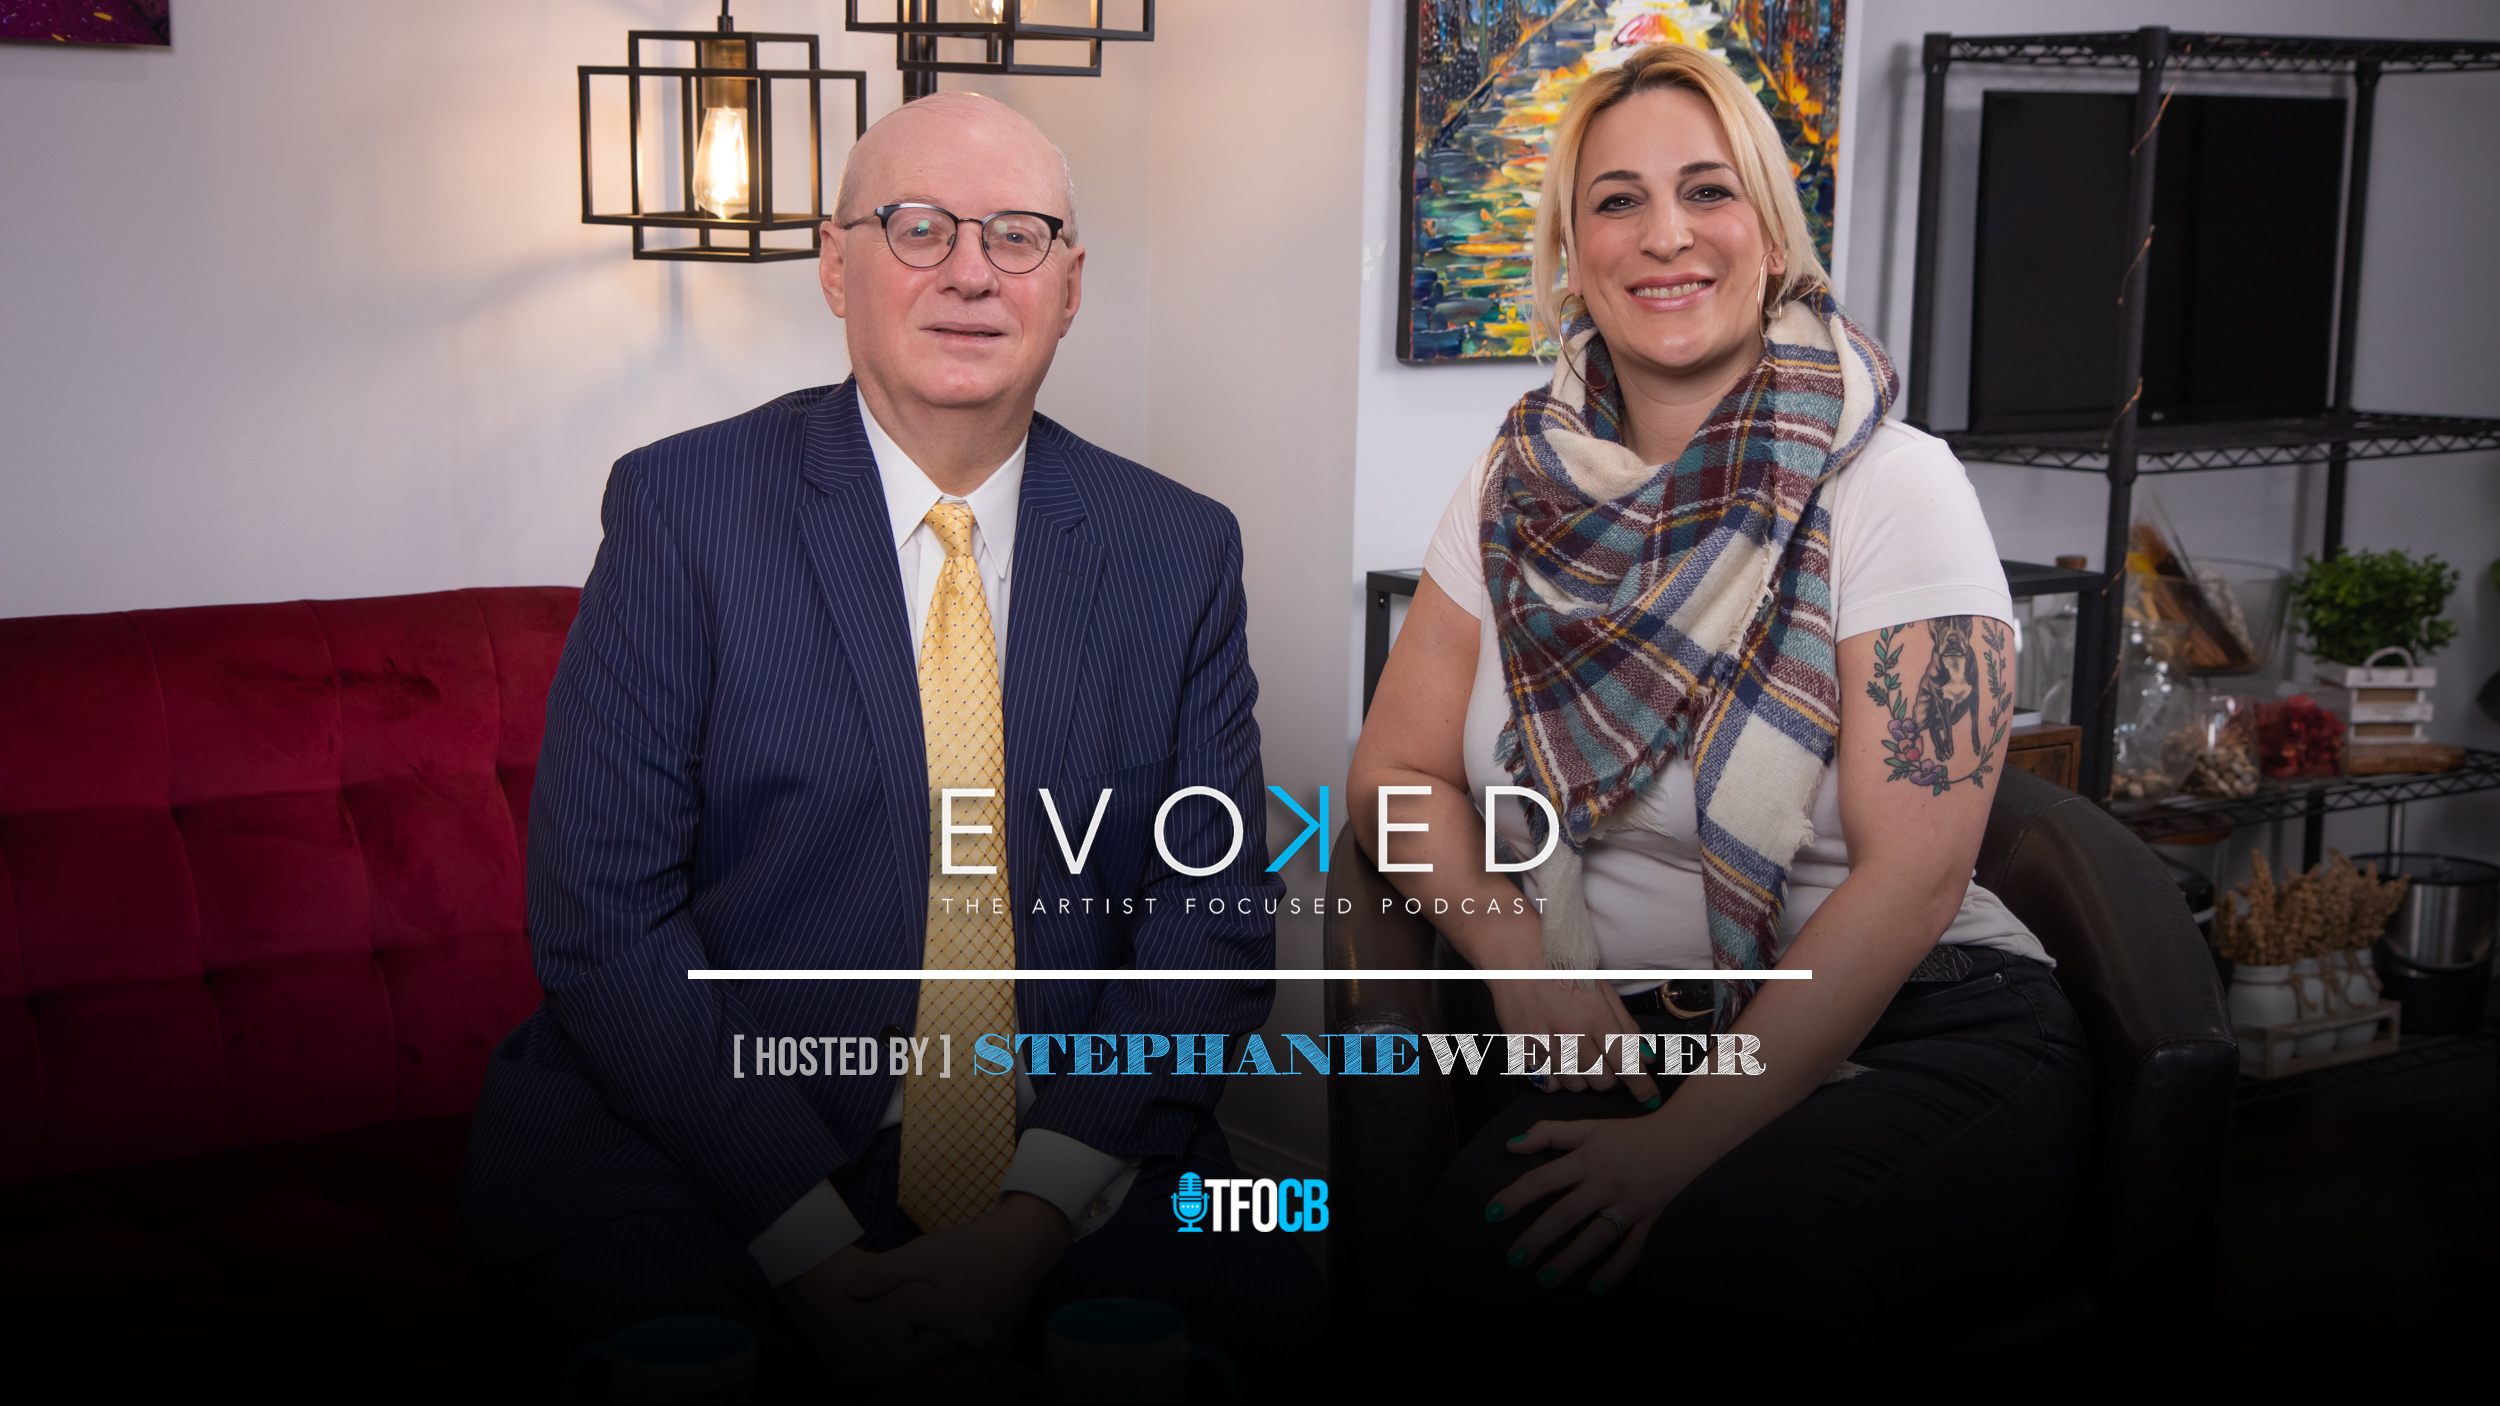 EVOKED [Rich Daniels] hosted by Stephanie Welter - Video copy